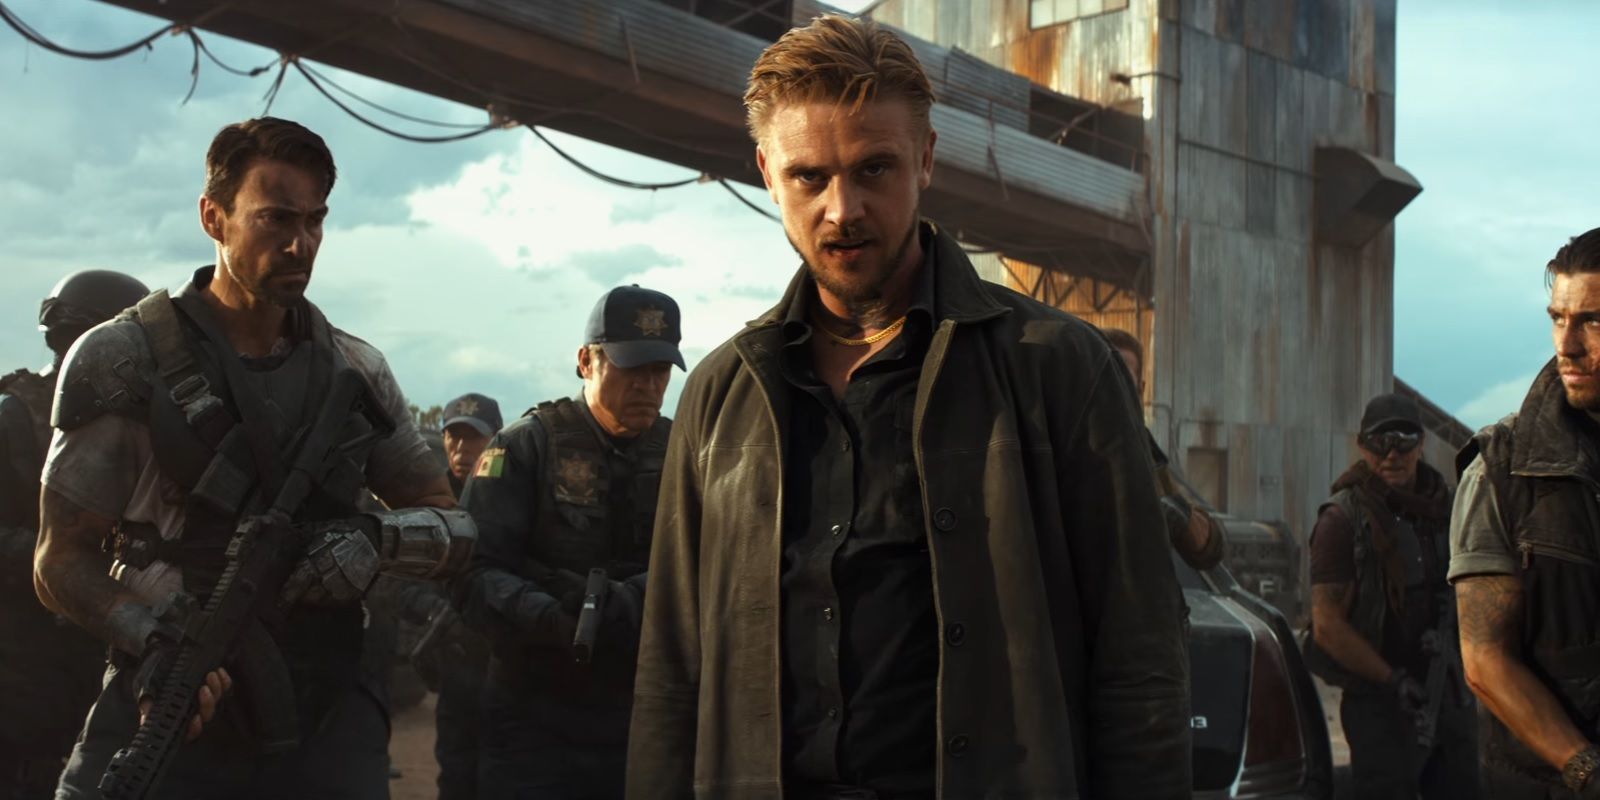 Boyd Holbrook as Donald Pierce with the Reavers in "Logan"